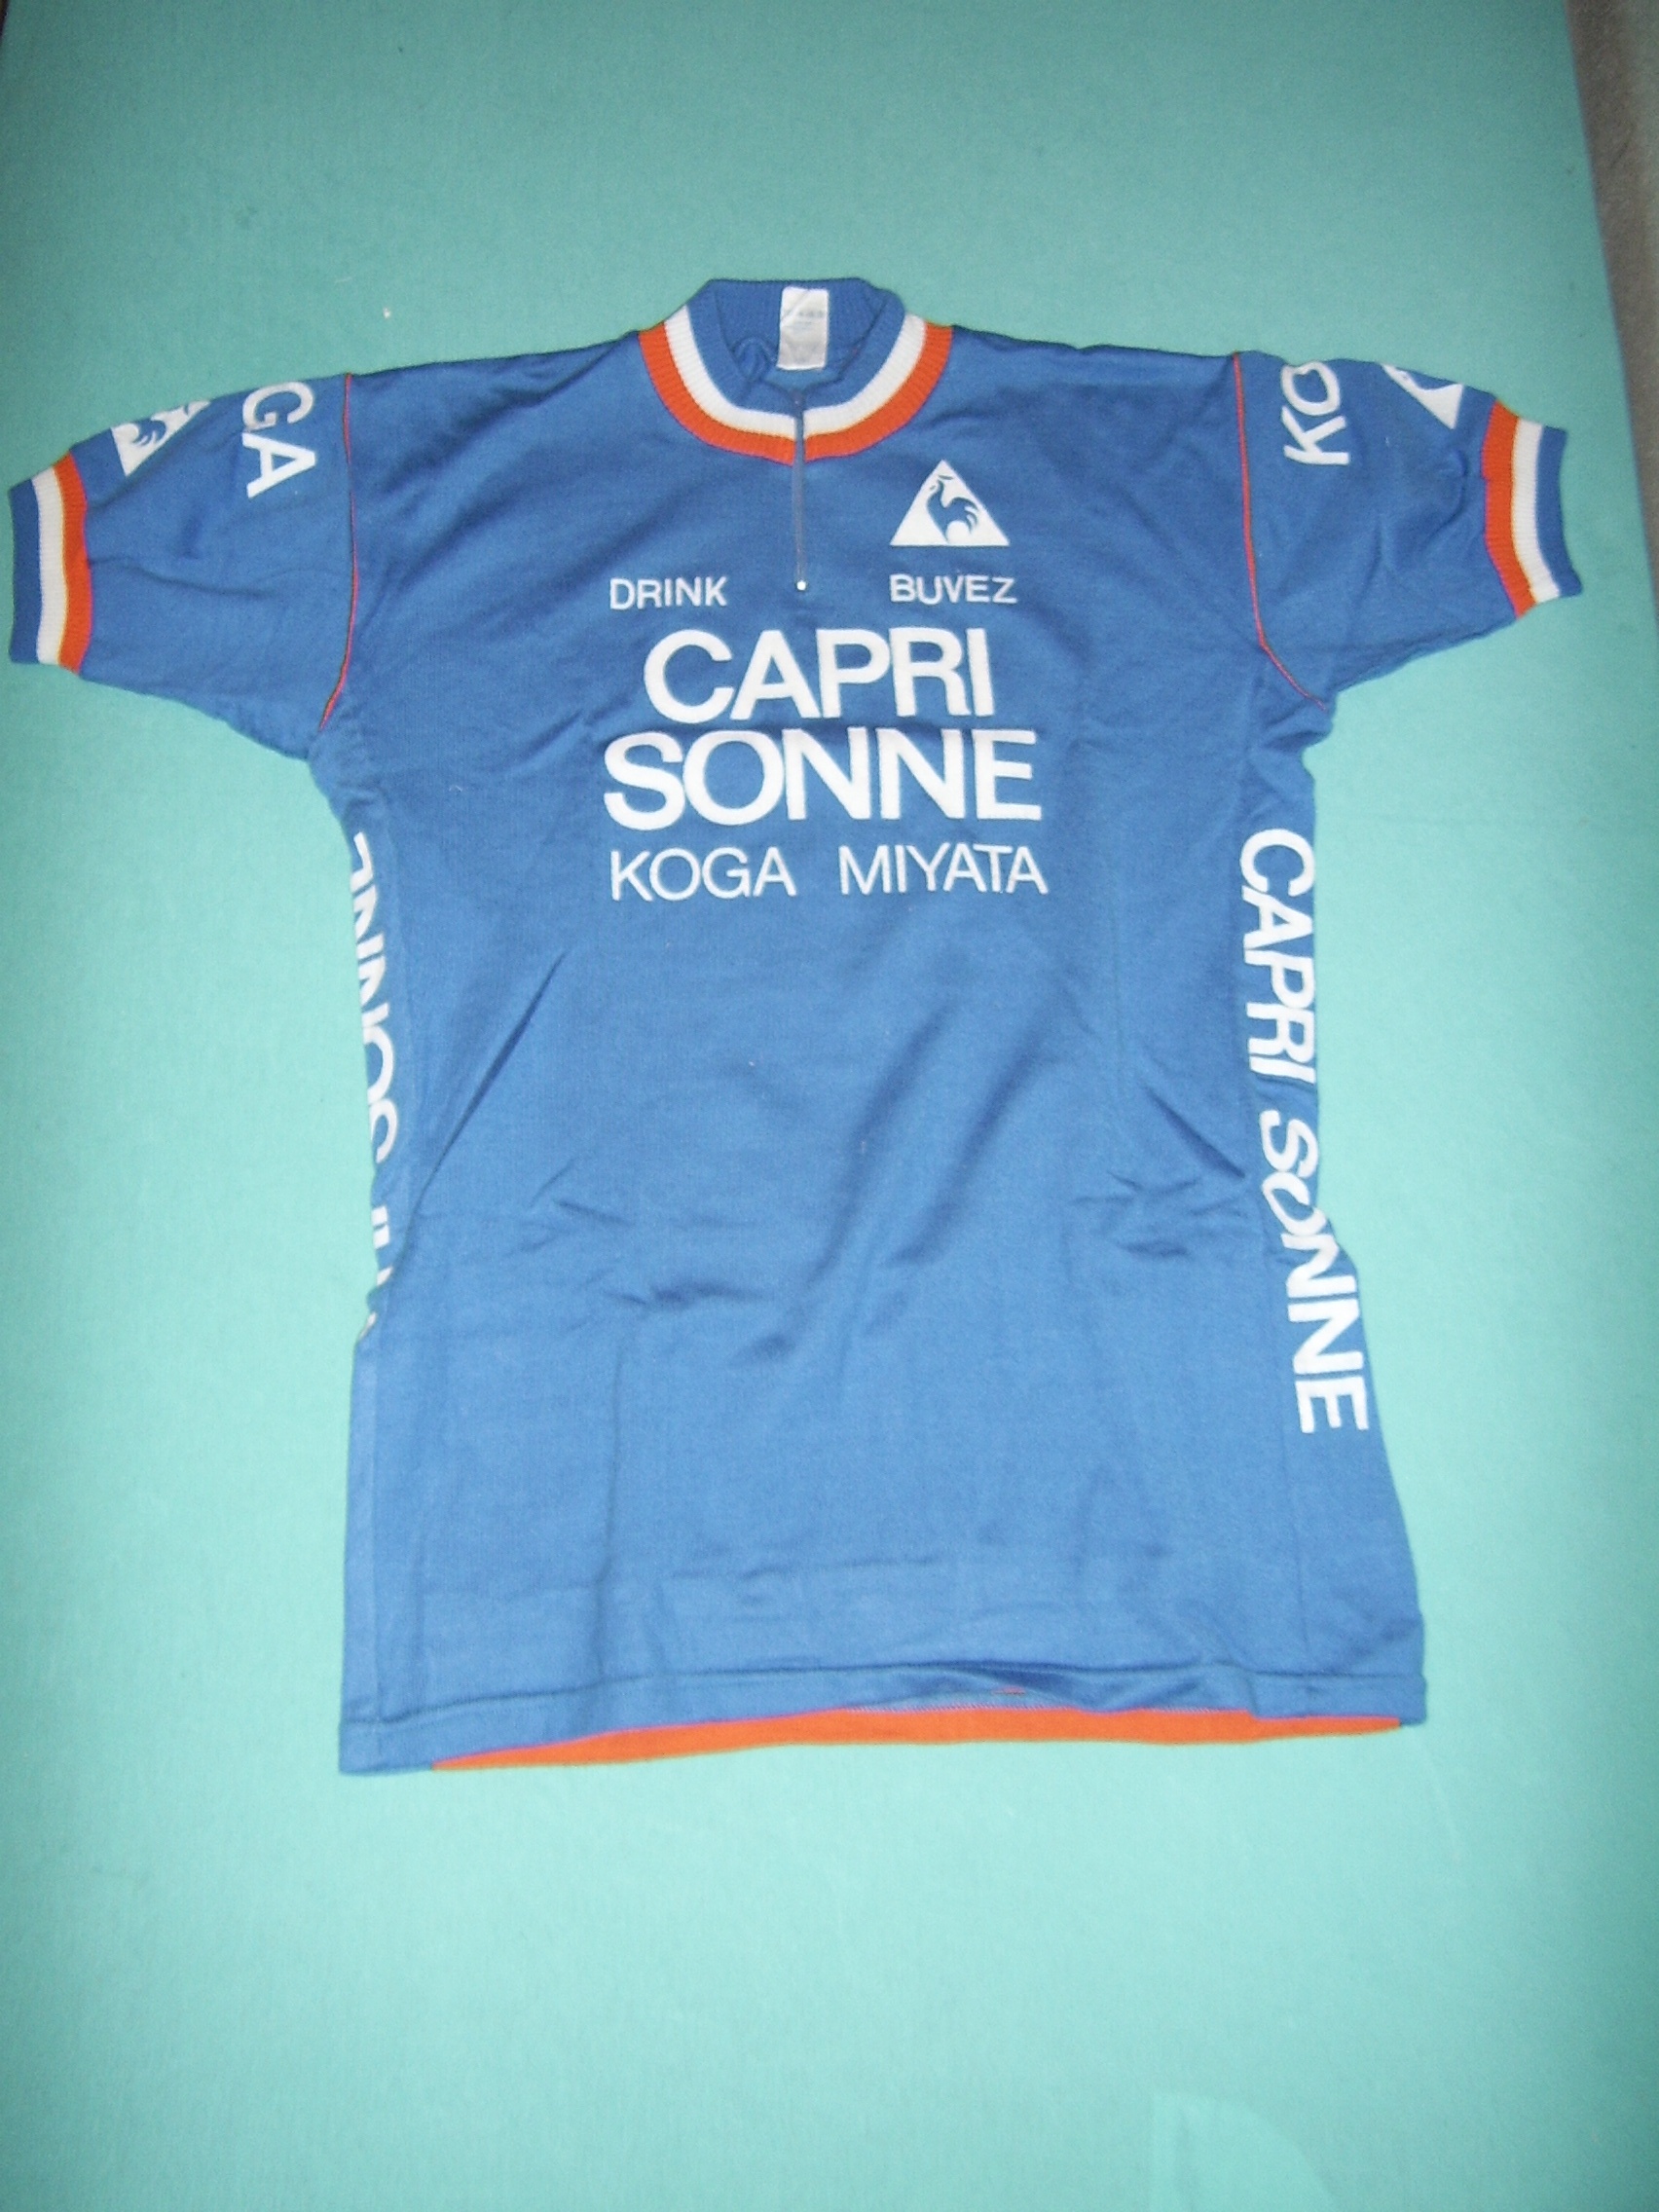 Capri Sonne cycling vintage long sleeve jersey - Pulling Turns